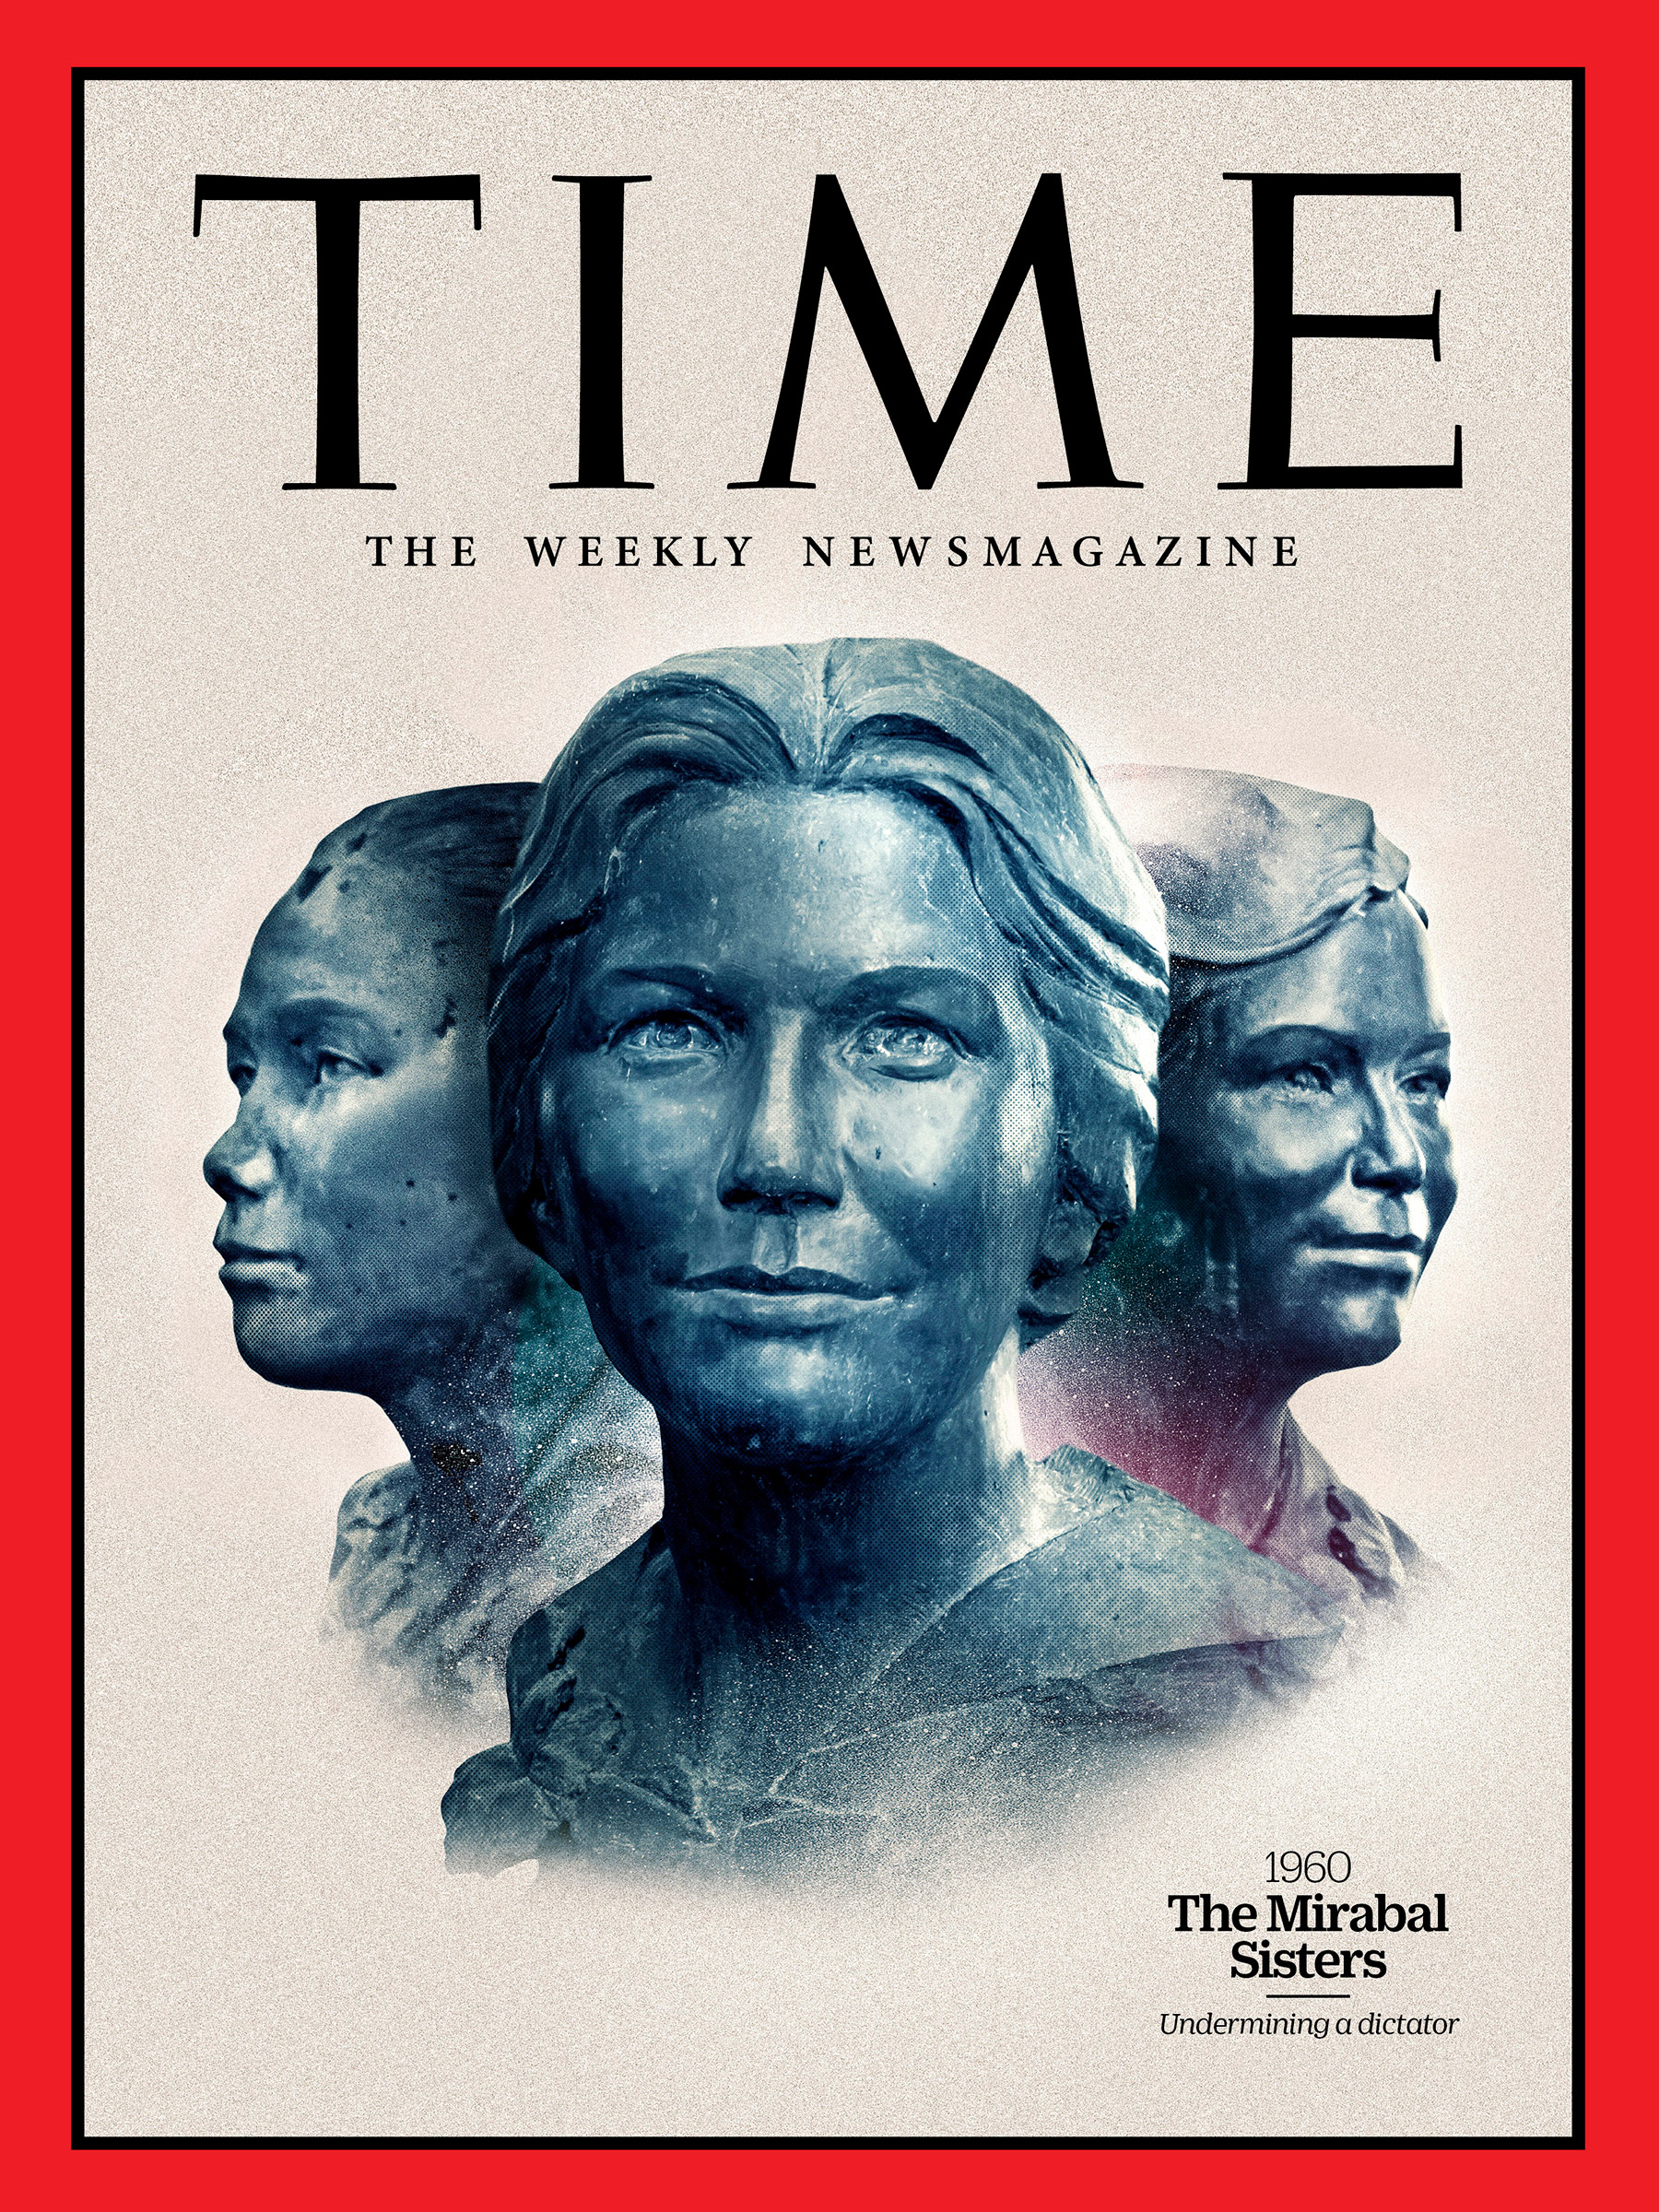 <a href="https://fineartamerica.com/featured/the-mirabal-sisters-1960-time.html"><strong>Buy the cover art→</strong></a> (Illustration by Neil Jamieson for TIME; Ricardo Hernandez—AFP/Getty)